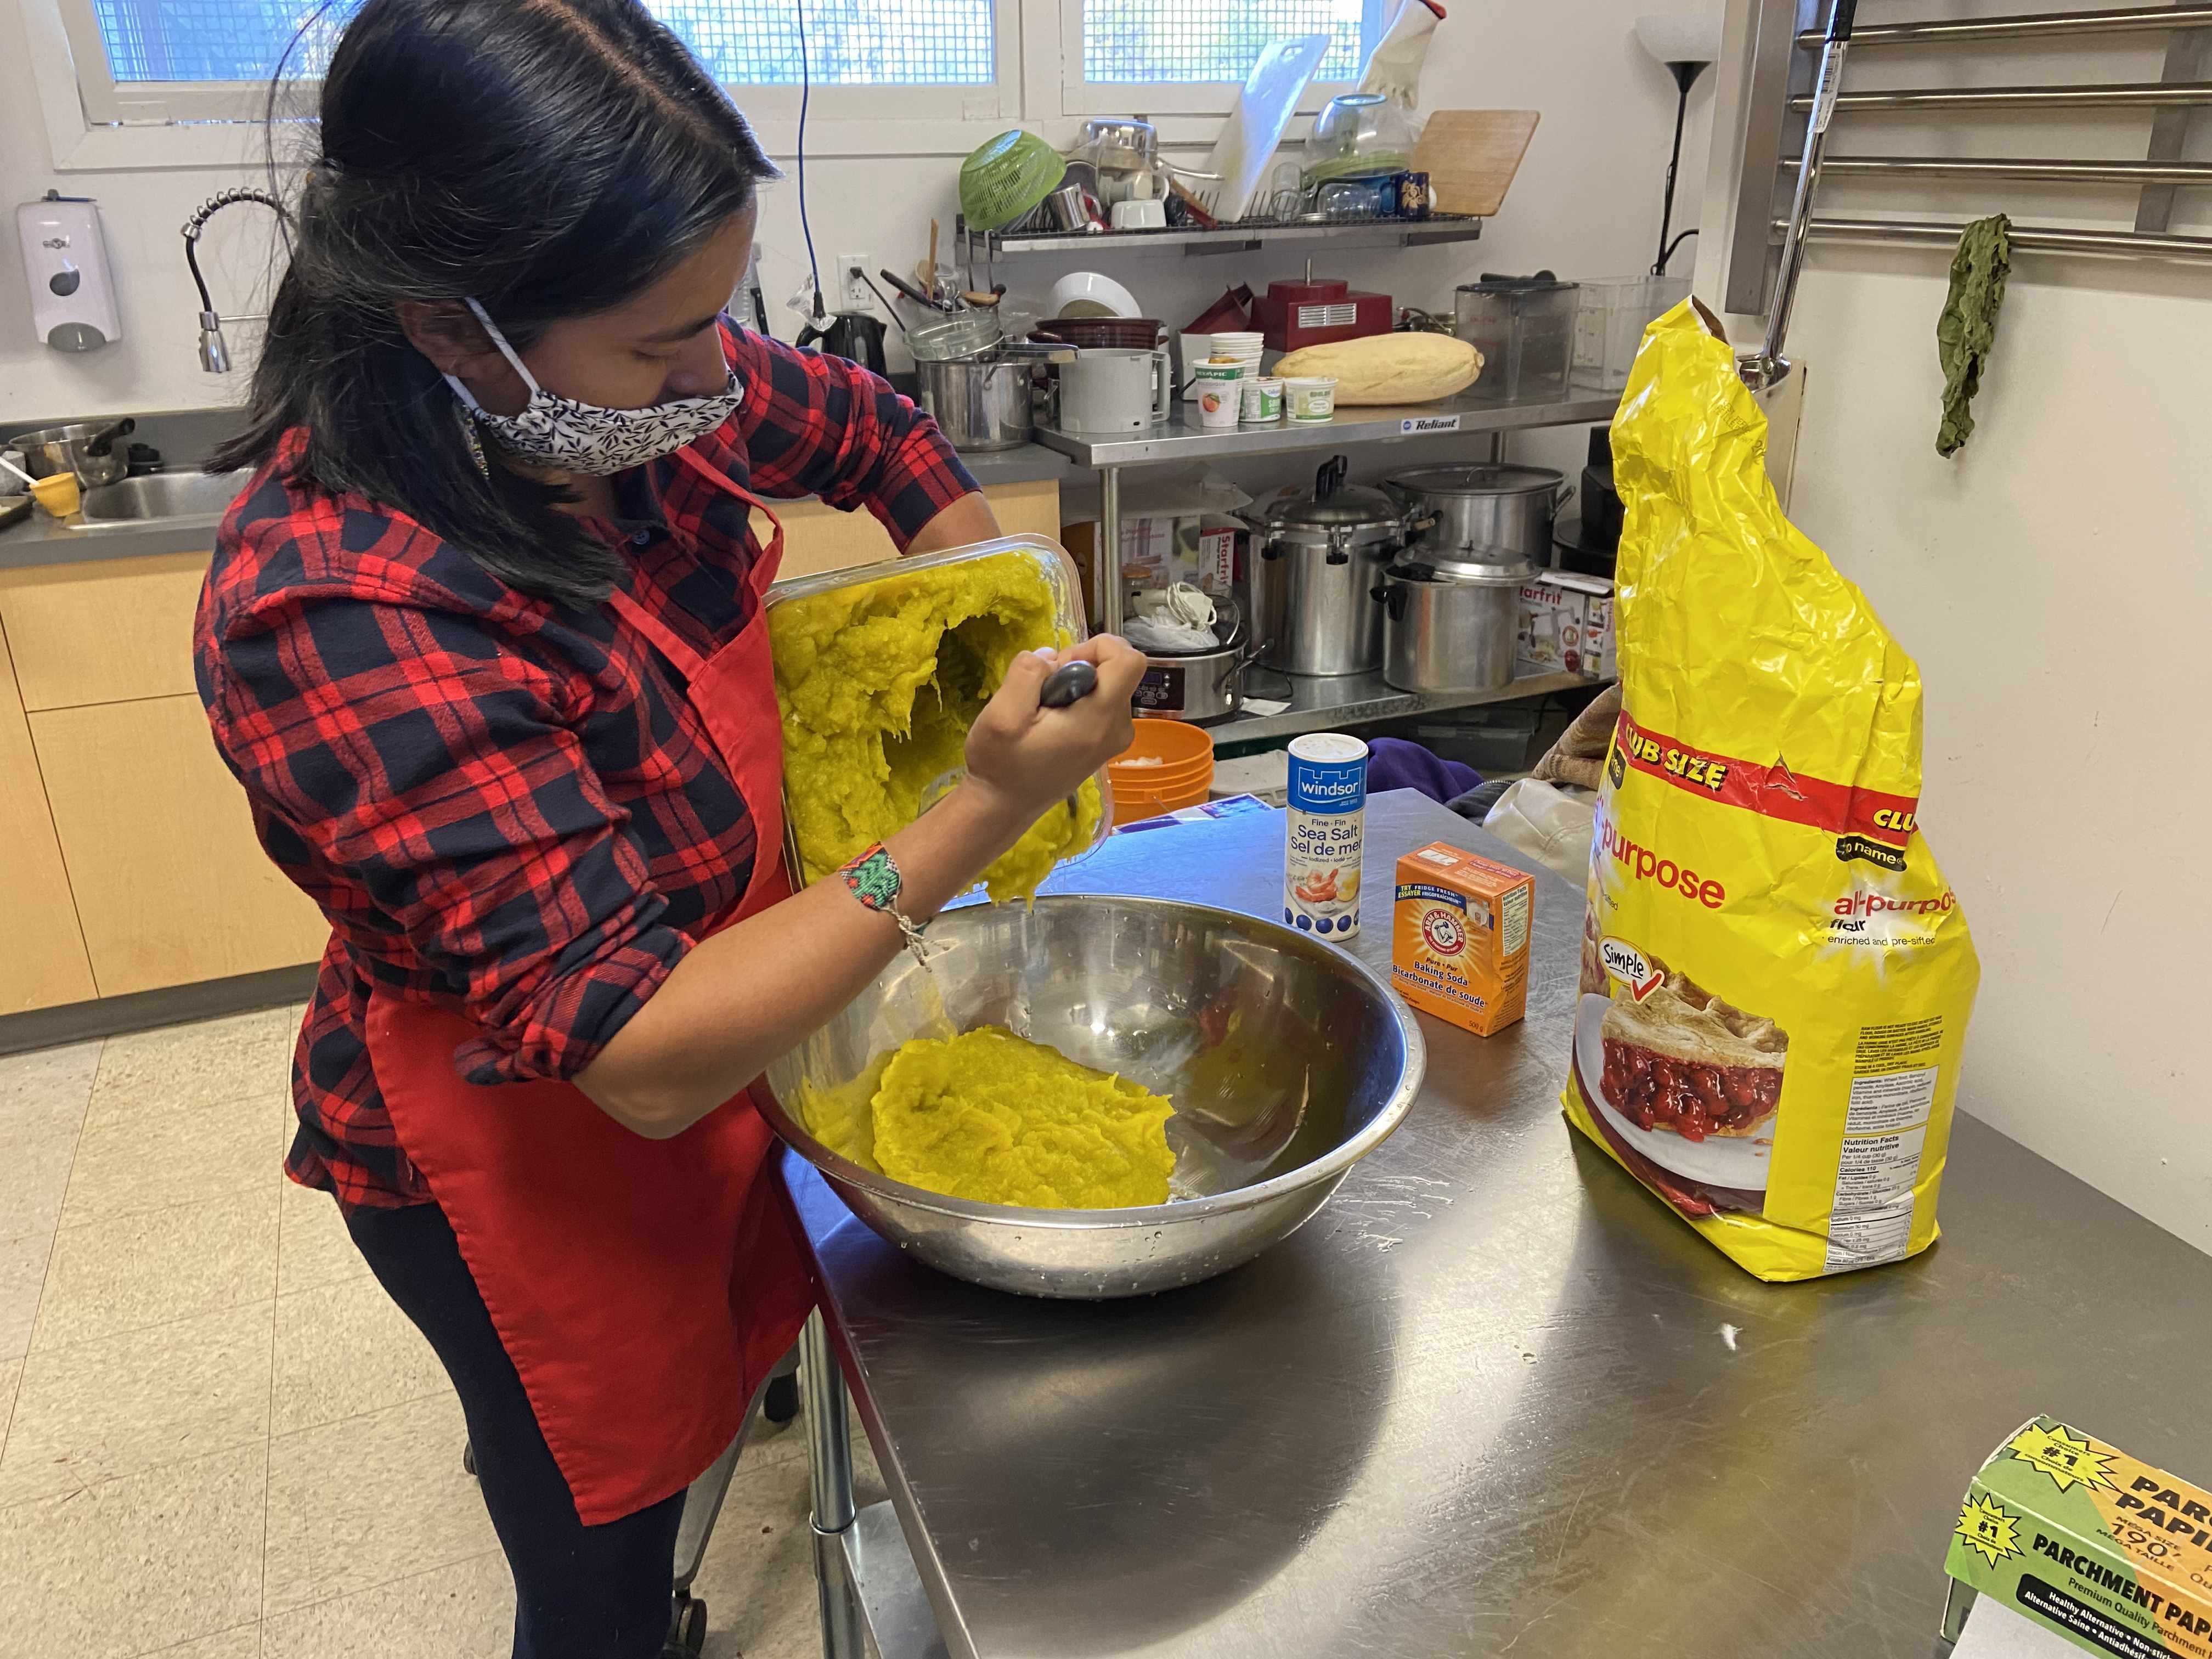 Ingrid mixing a flour and squash mixture into a metal bowl on a countertop alongisde a bag of flour, a box of baking soda and a container of salt